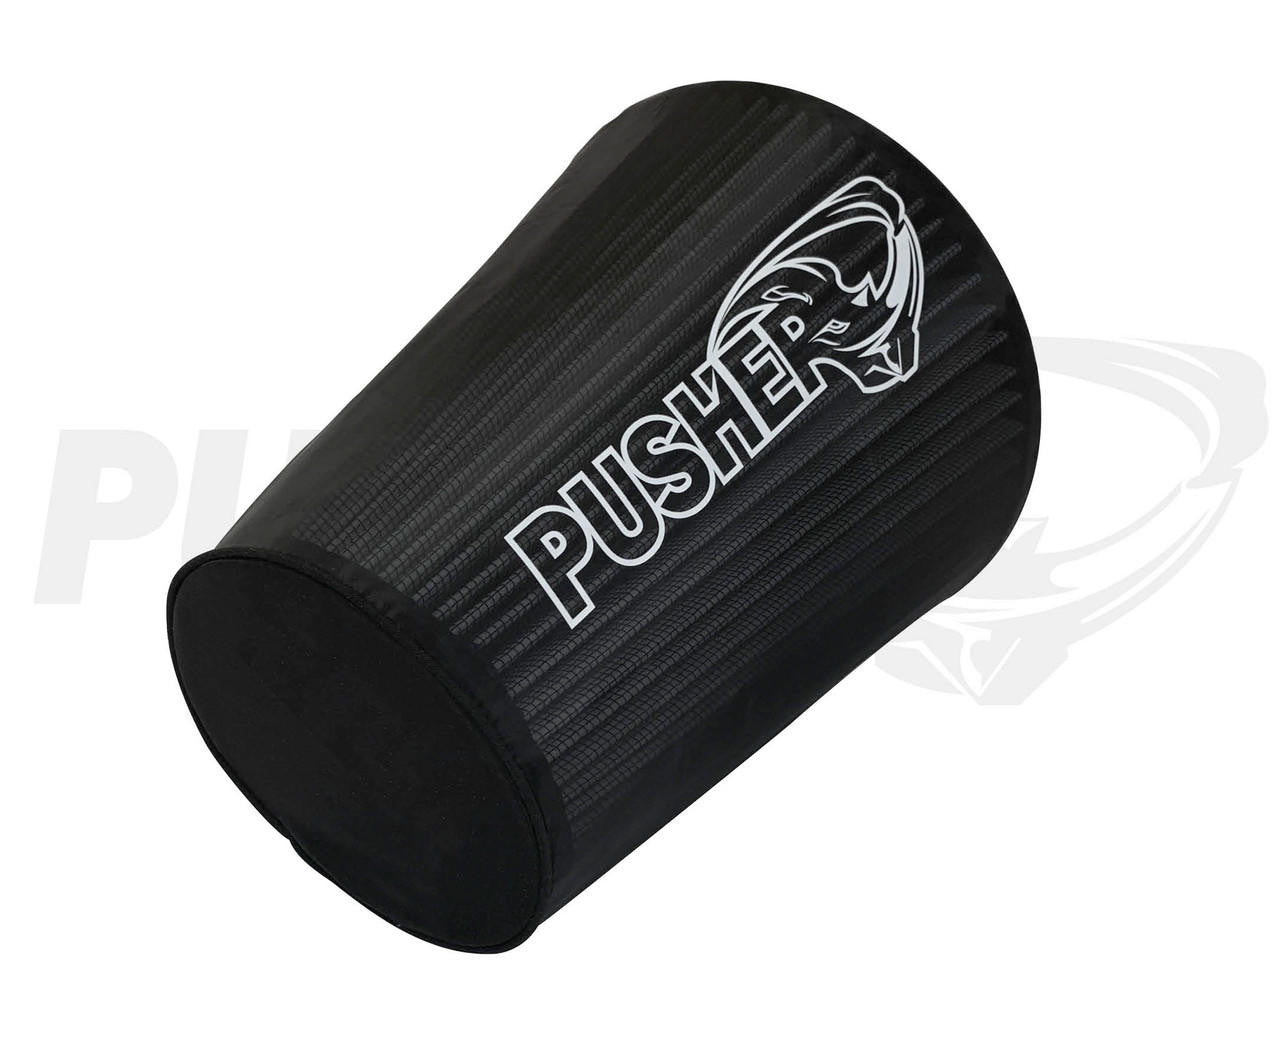 Pusher Intakes Pusher Pre-Filter for Pusher Hollow Point Air Filter 40CAL and 50CAL PPF9-4050 